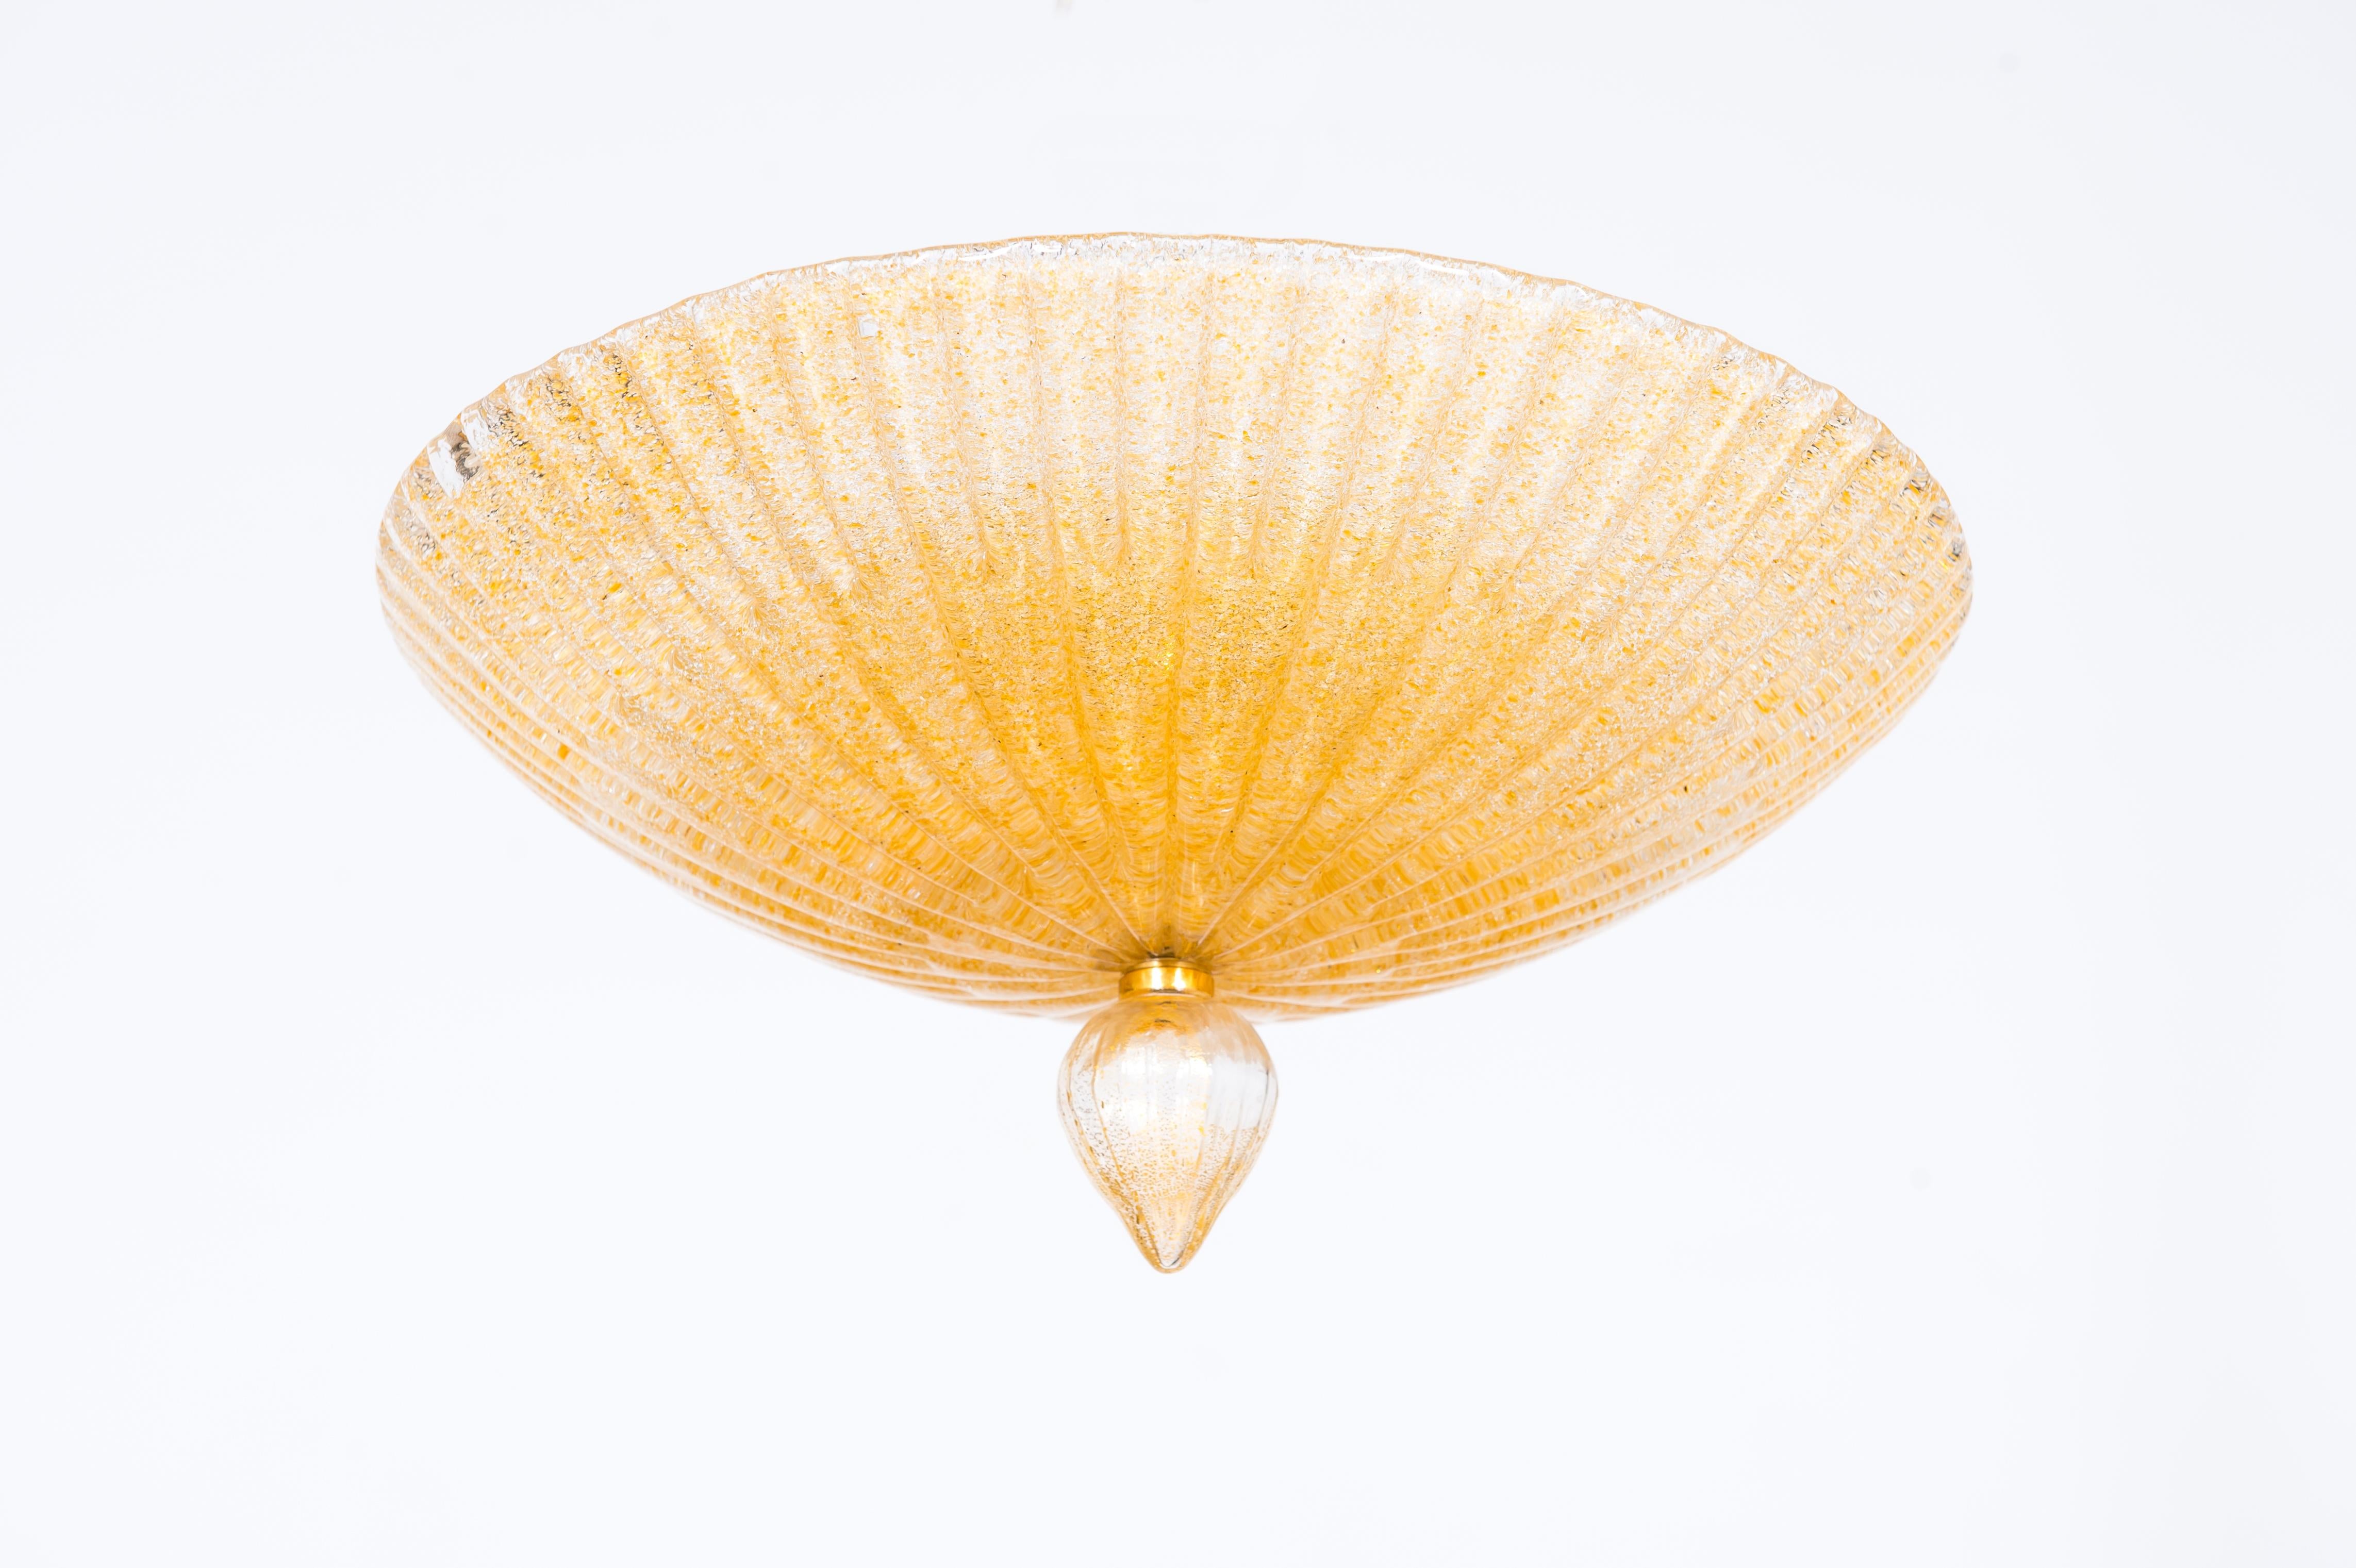 Golden Rays Flush Mount in Sprinkled Amber Blown Murano Glass Venice Italy 1980s
This shining bright flush mount dates back to the 1980s. Handcrafted in Murano, the Venetian island renowned for the finest tradition of glassmaking, it is attributed